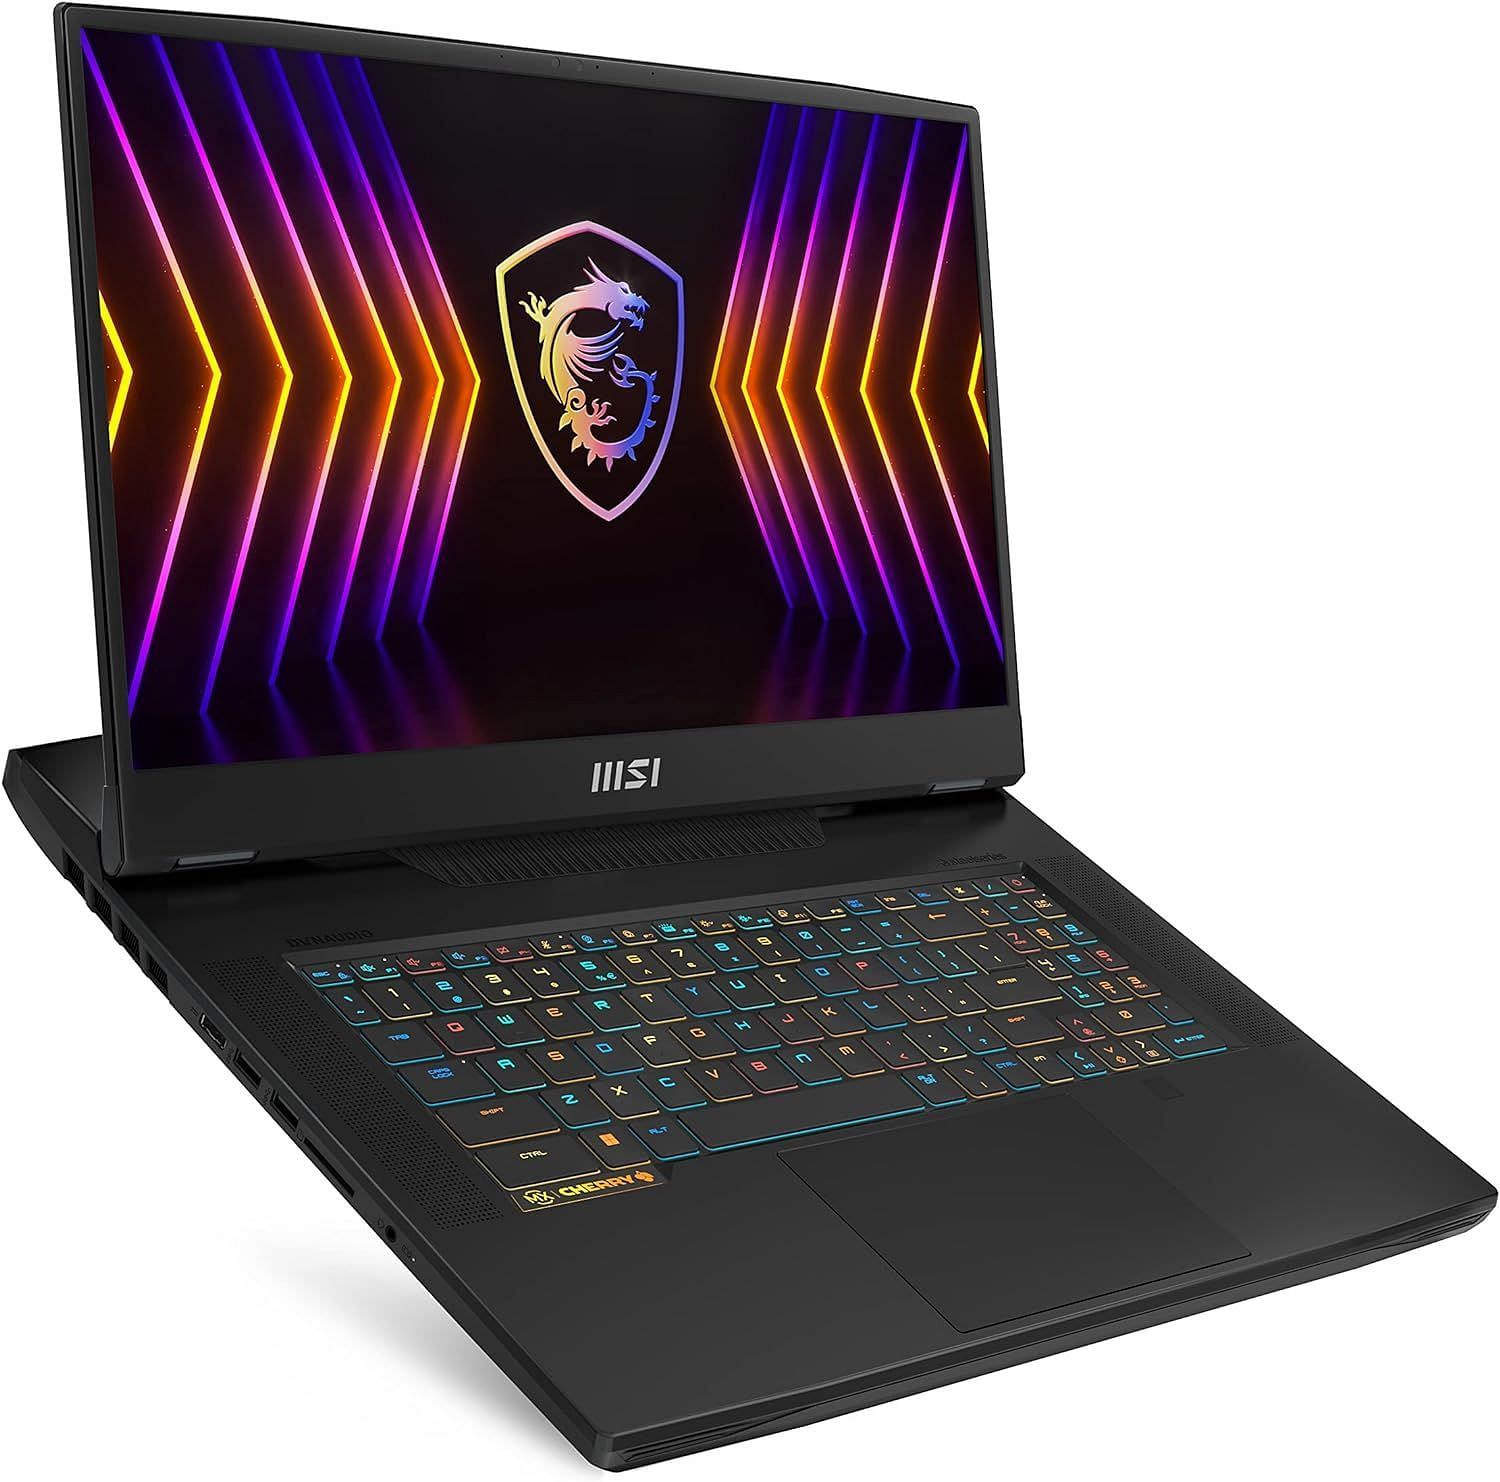 The fourth laptop on our list is the MSI Titan GT77 (Image via Amazon)